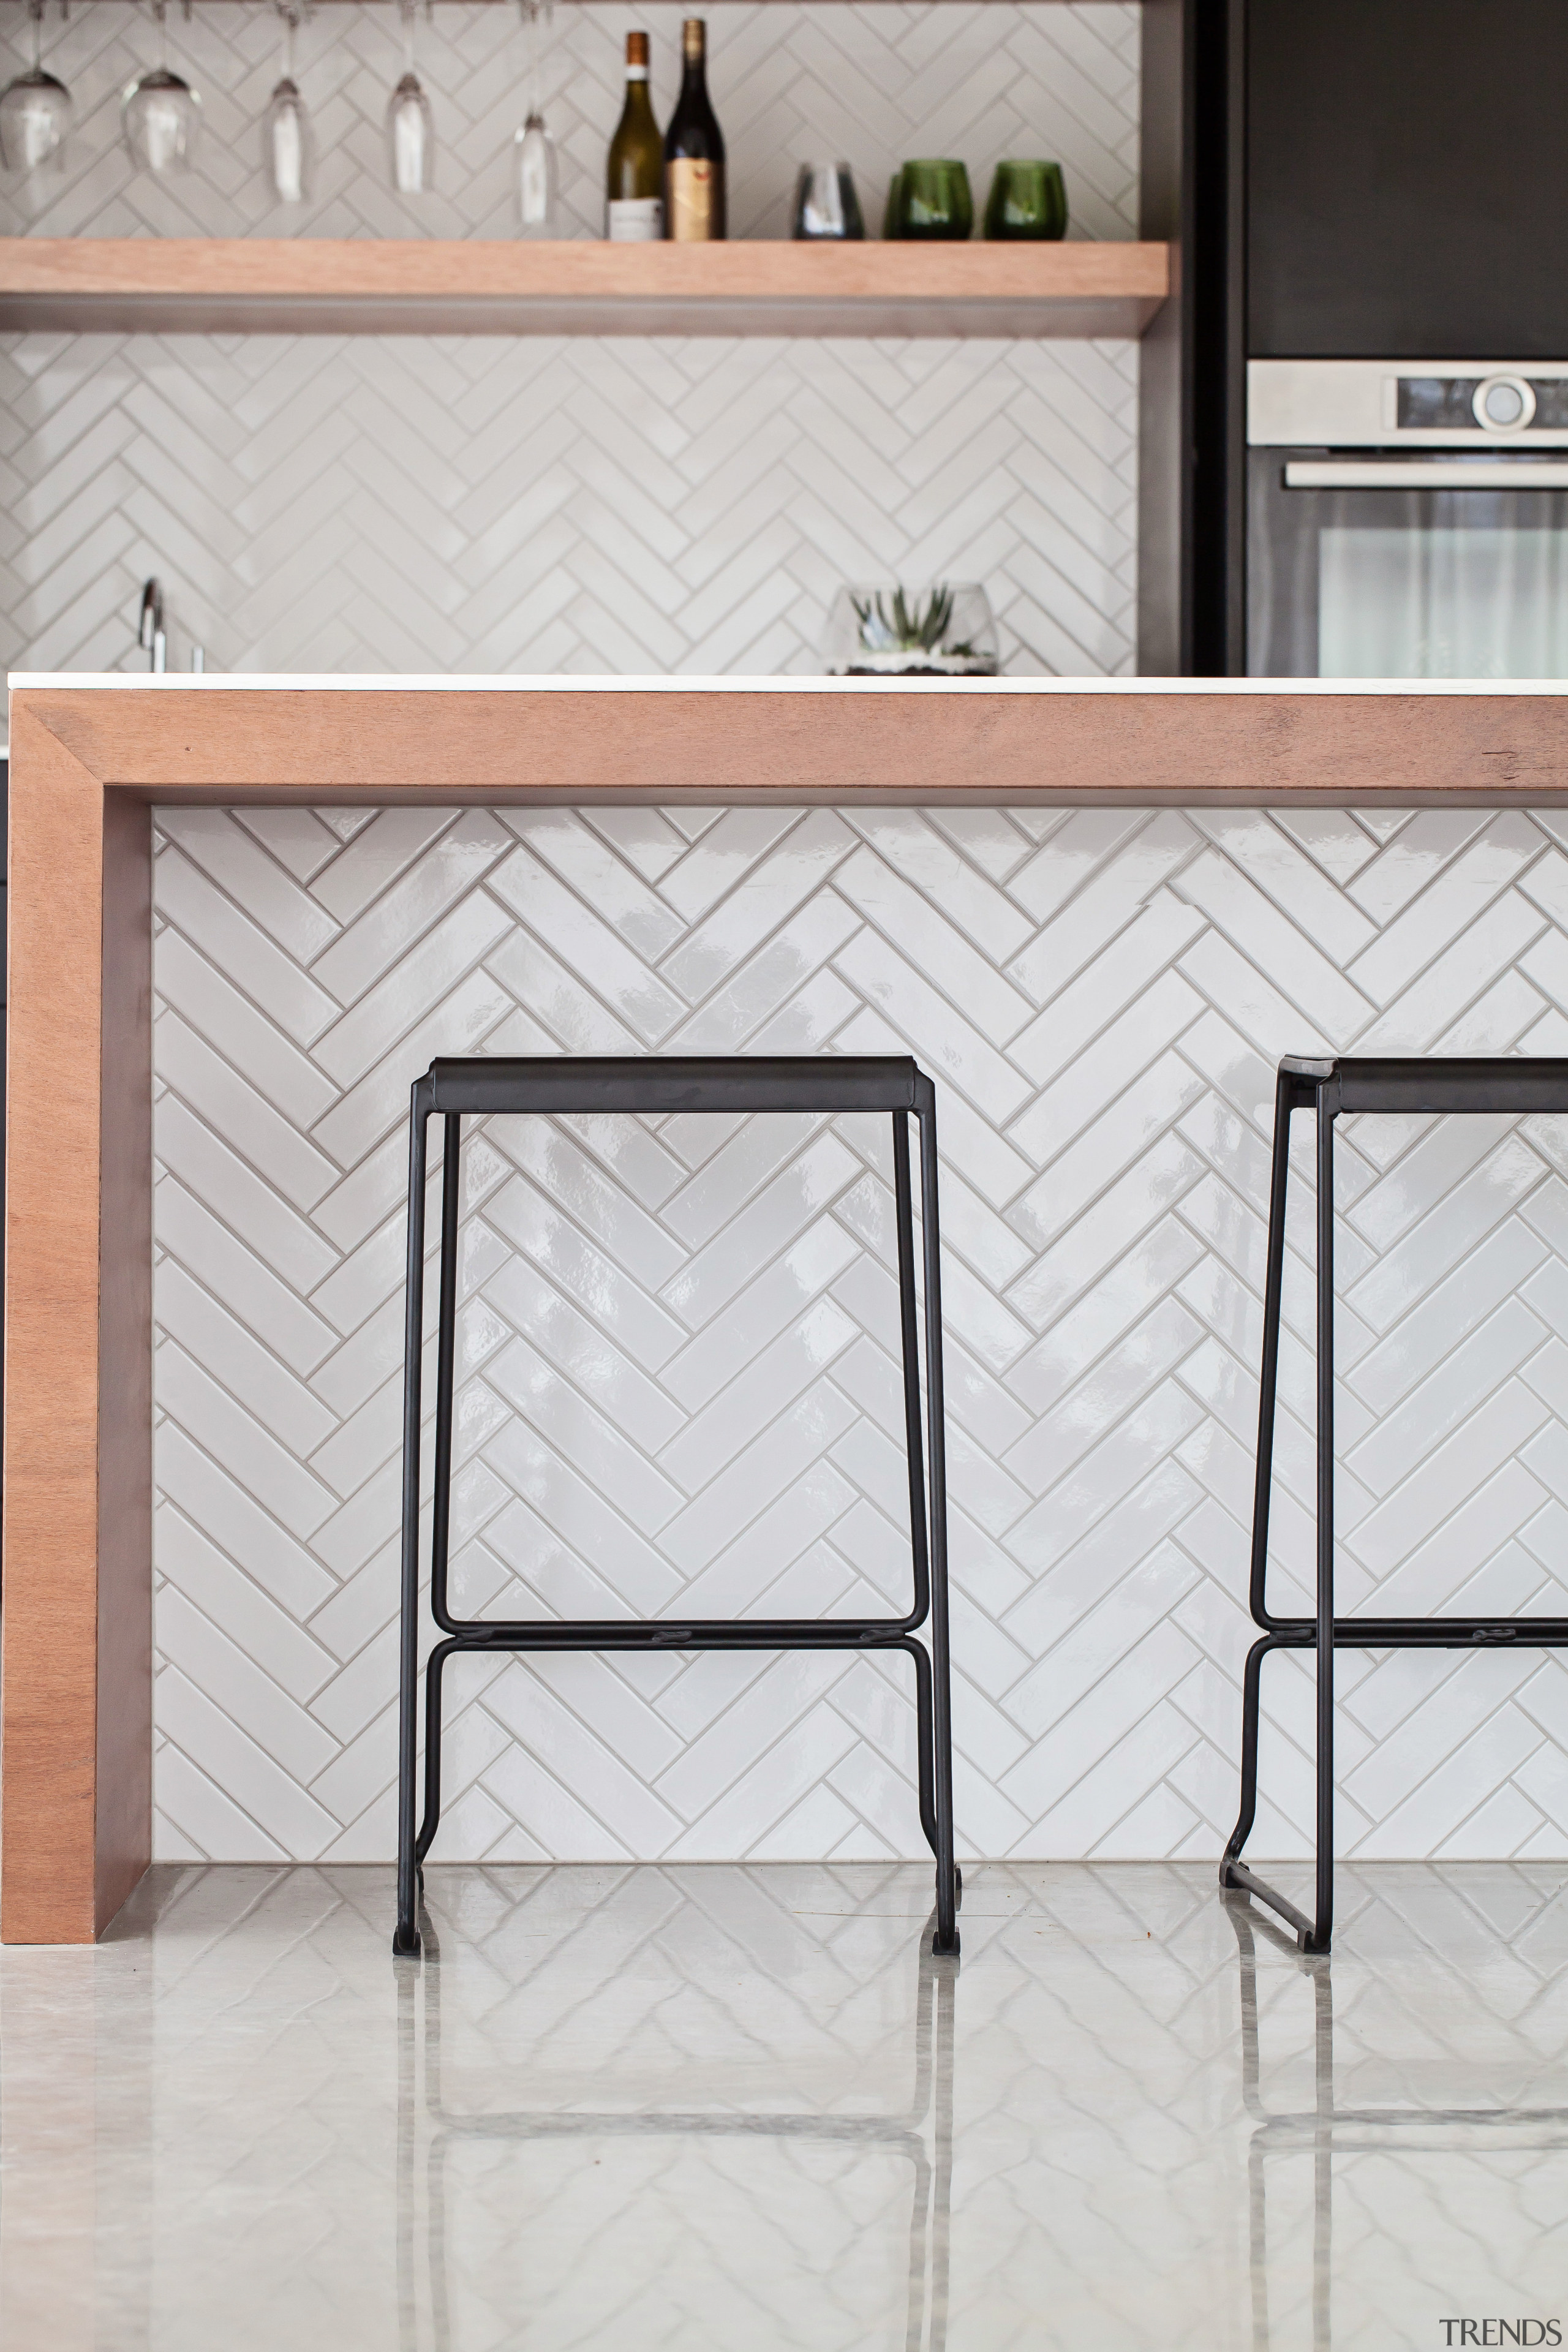 Piece by piece  the matching herringbone tiles floor, furniture, glass, product, product design, shelf, shelving, table, wall, gray, white